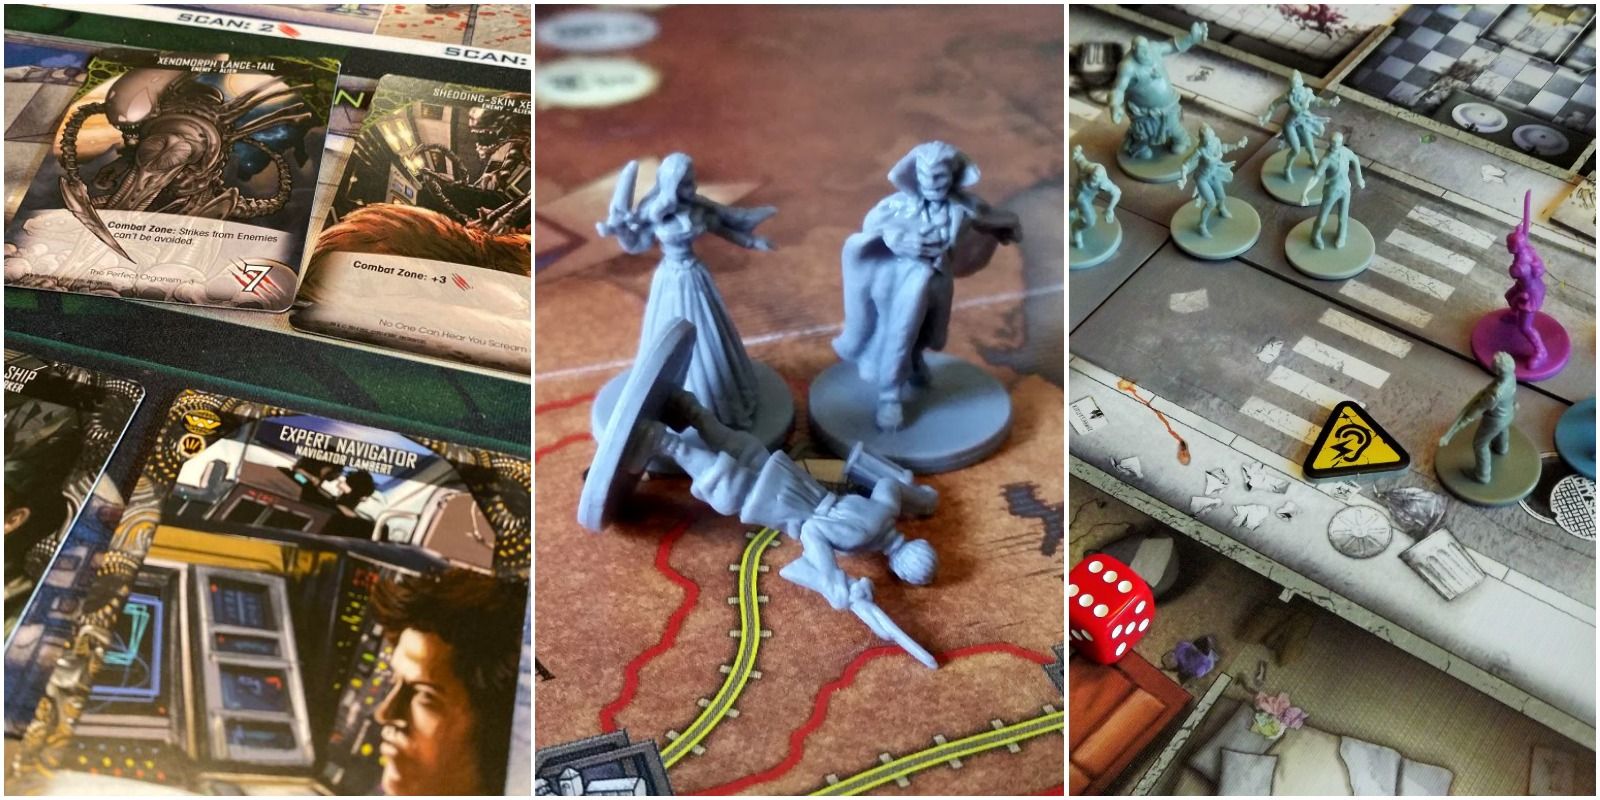 10 Best Horror Board Games Legendary Alien Encounters Fury Of Dracula Zombicide Being Played On The Table